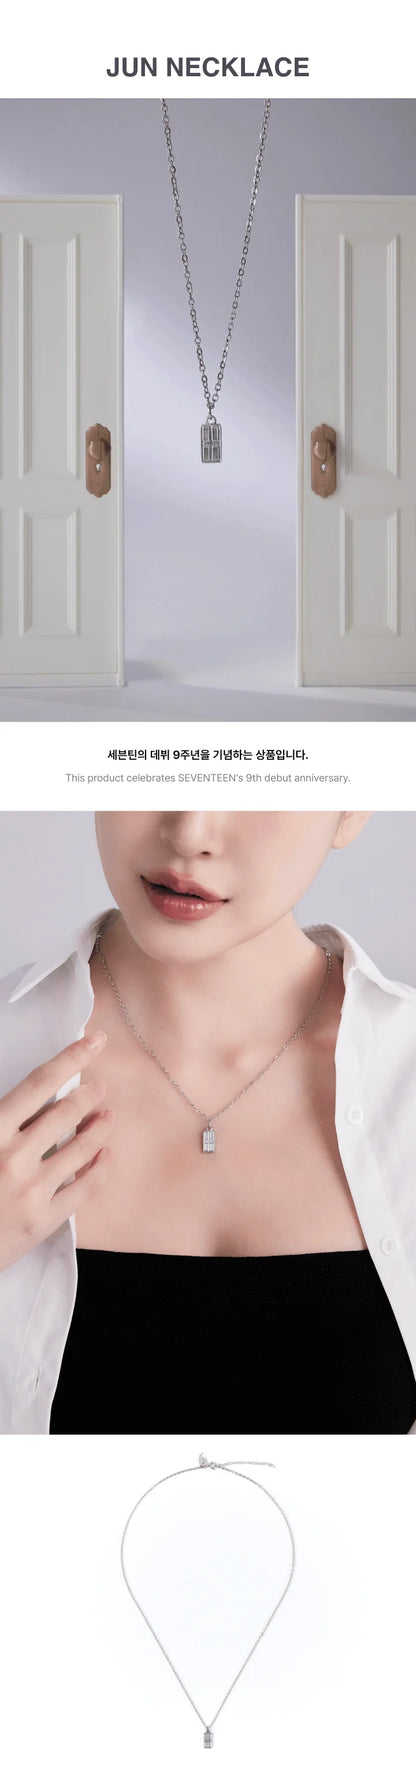 [PRE ORDER] SEVENTEEN - 9TH ANNIVERSARY (Official MD) / NECKLACE : JUN